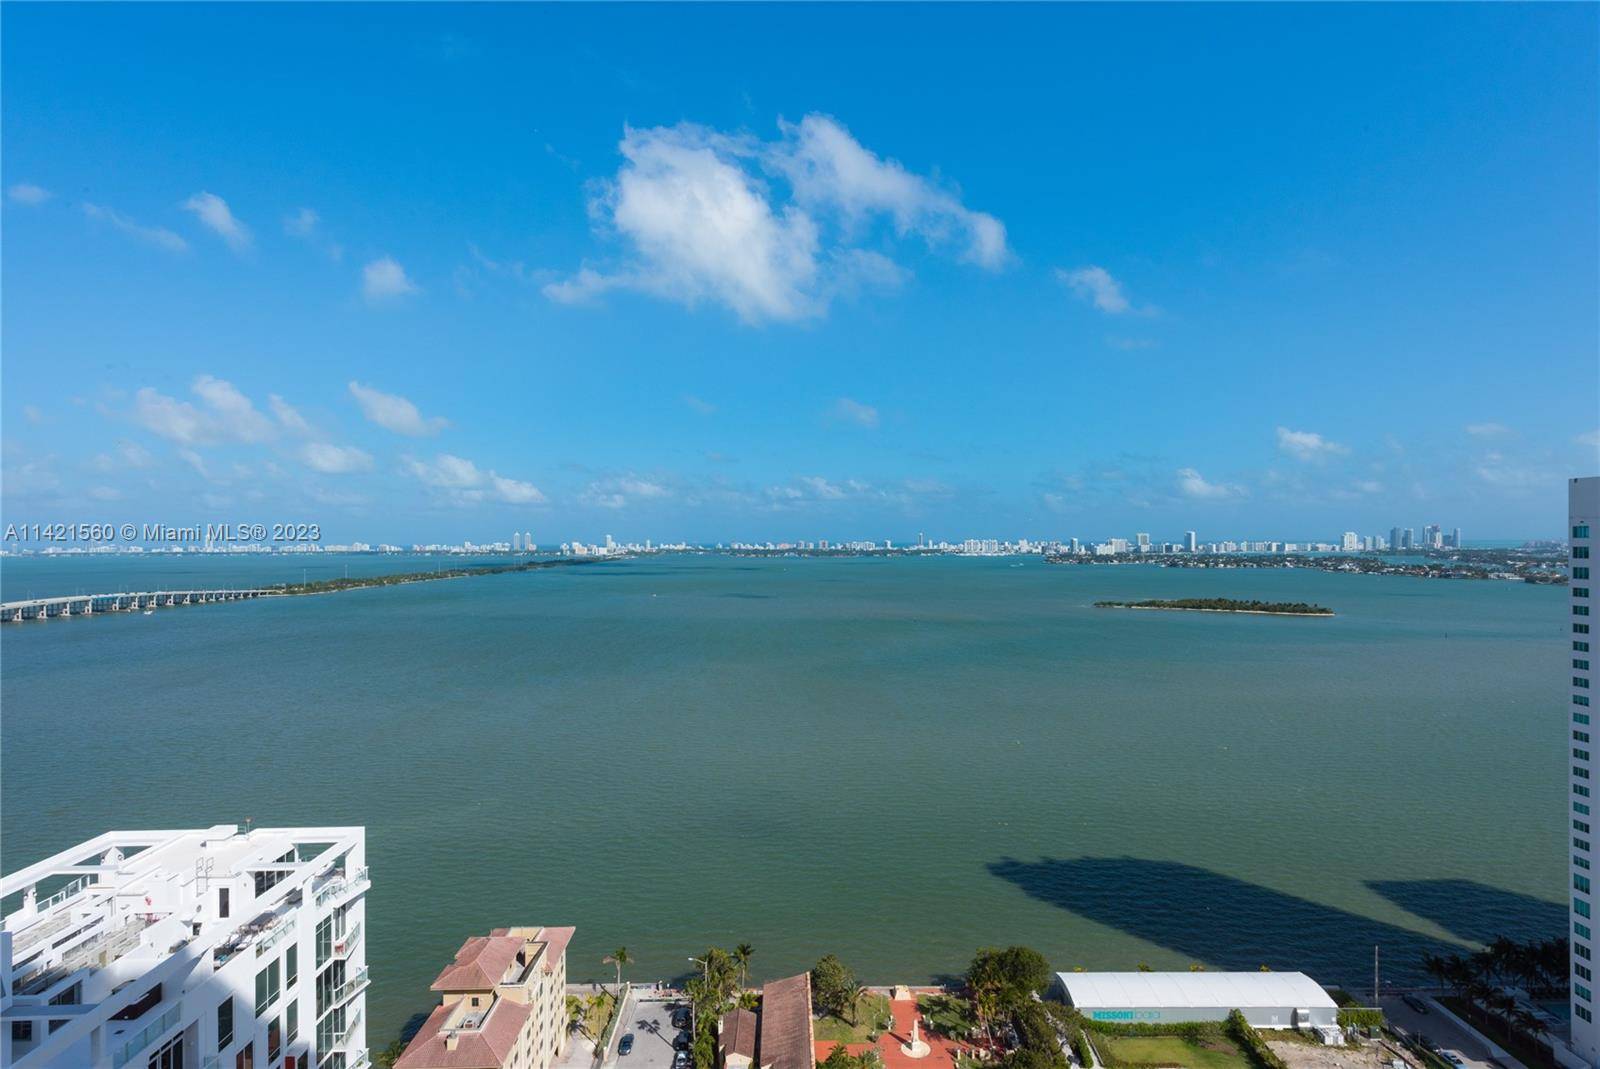 Spacious 3 bedrooms and 3 baths Residence located in Edgewater Miami completed in 2015.